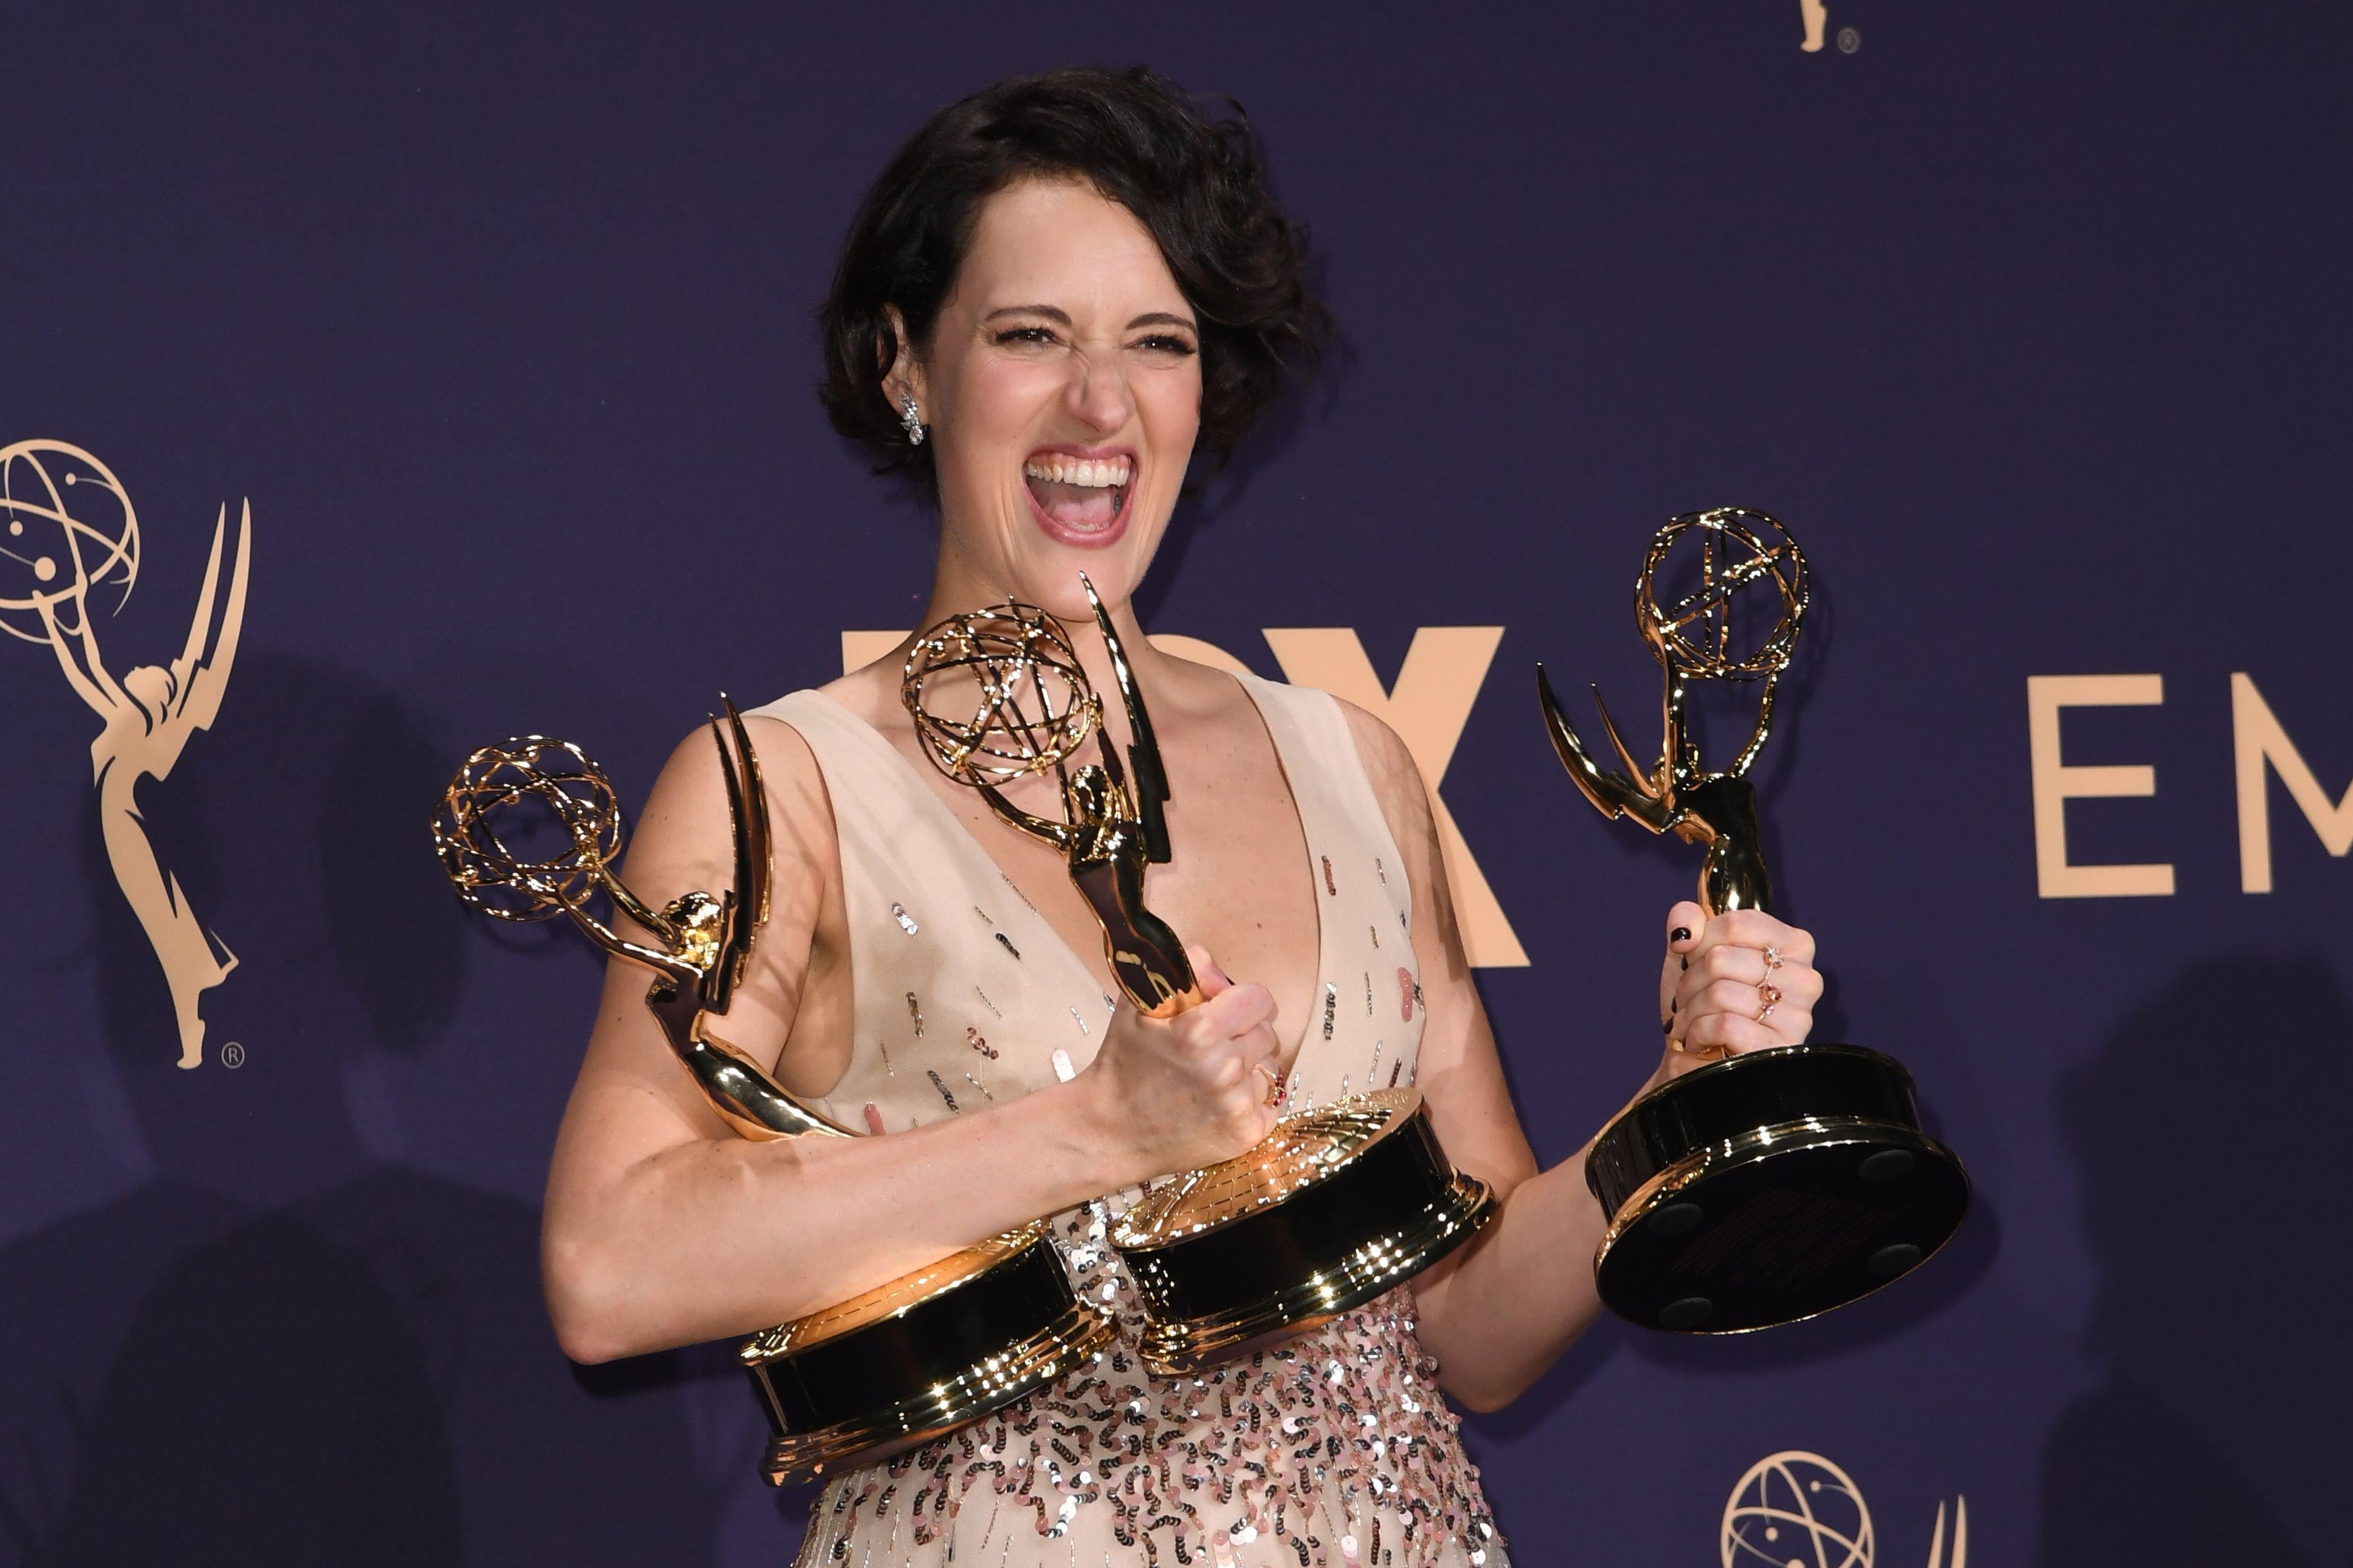 British actress Phoebe Waller-Bridge poses with the Emmy for Outstanding Writing for a Comedy Series, Outstanding Lead Actress In A Comedy Series and Outstanding Comedy Series for "Fleabag" during the 71st Emmy Awards at the Microsoft Theatre in Los Angeles on September 22, 2019. (Photo by Robyn Beck / AFP)        (Photo credit should read ROBYN BECK/AFP/Getty Images)